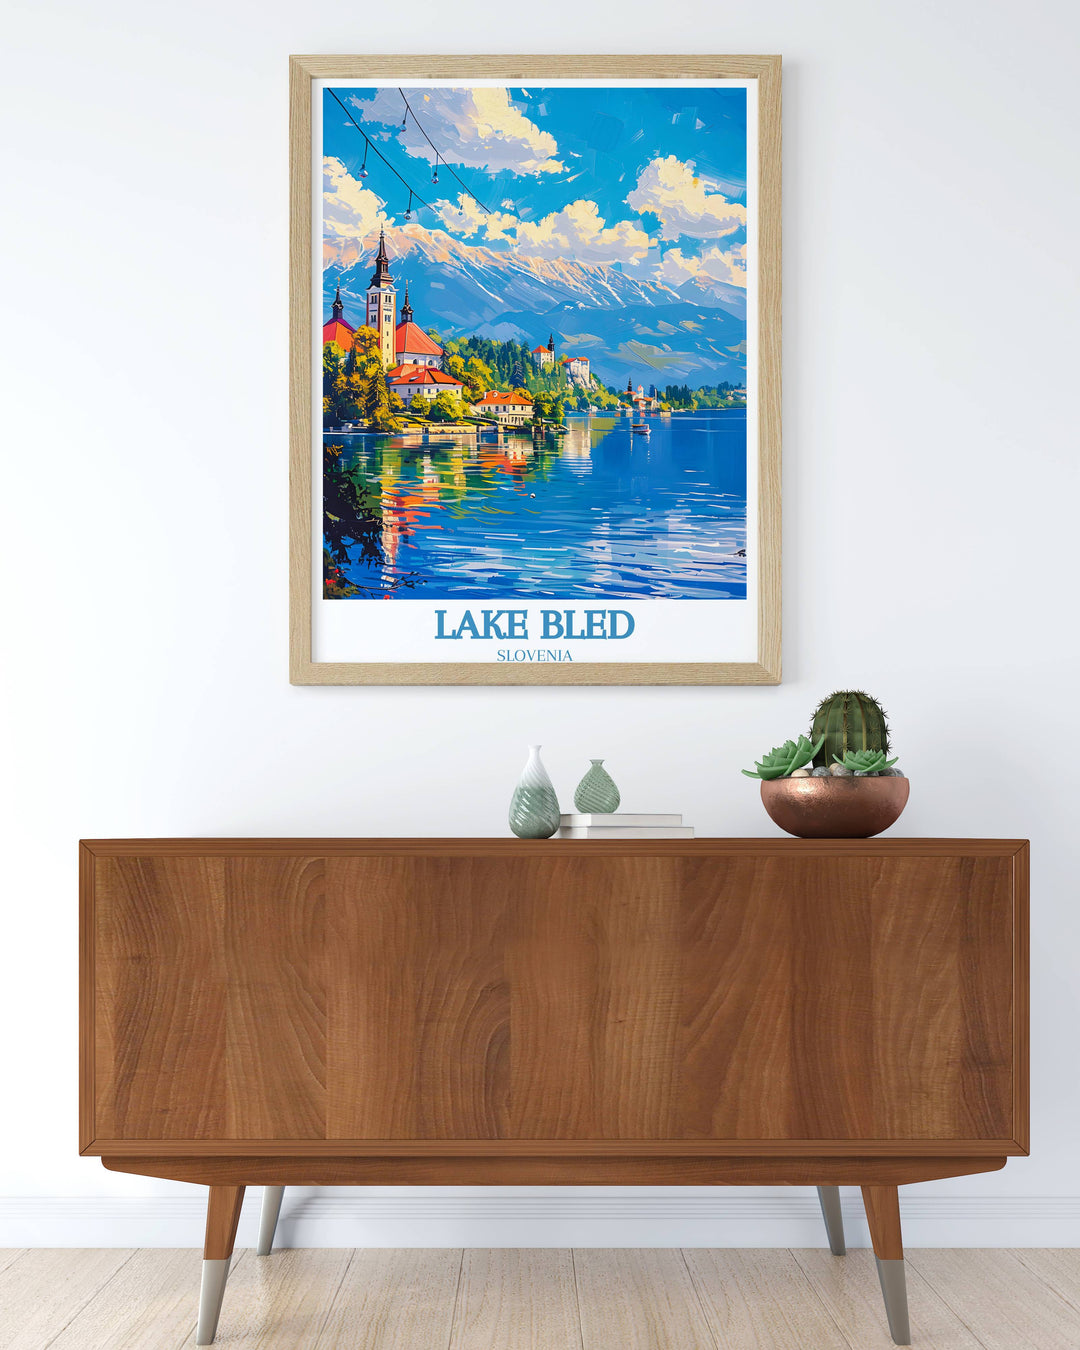 Detailed Lake Bled Artwork featuring the iconic reflection of the mountains in the lake, enhancing any room decor with a touch of serene nature and reflective tranquility, perfect for creating a peaceful environment